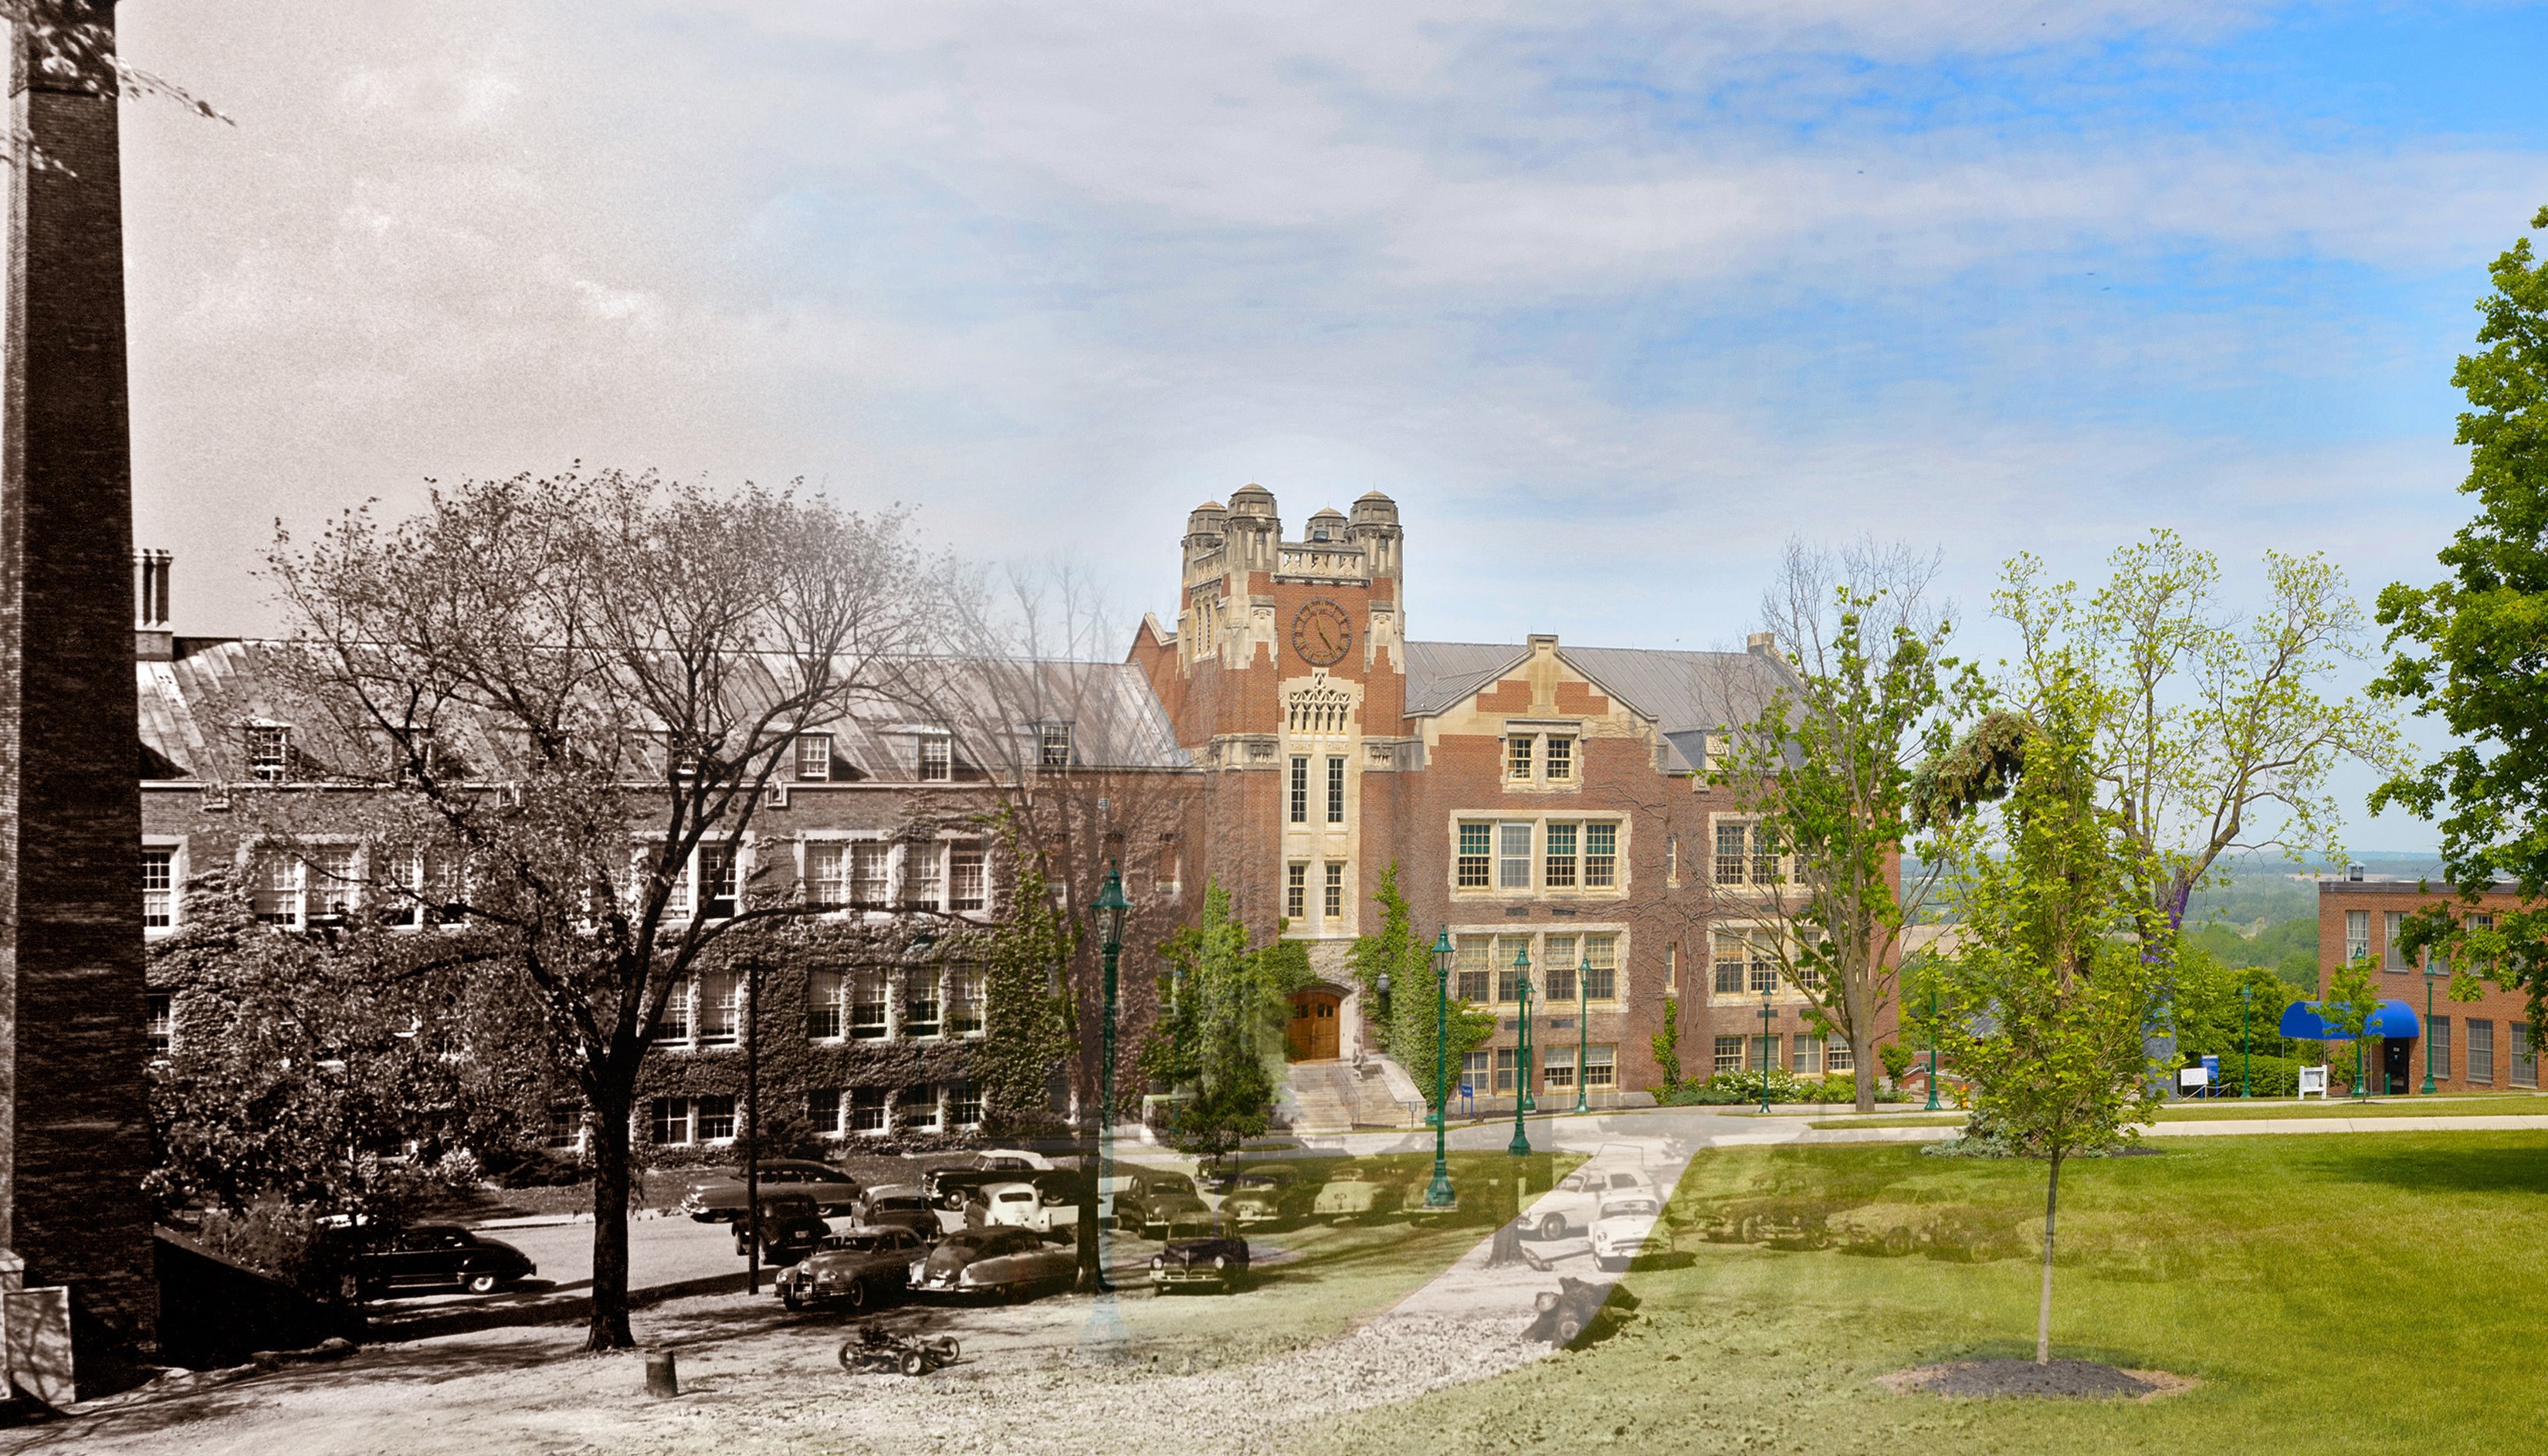 Read Then and Now by SUNY Geneseo